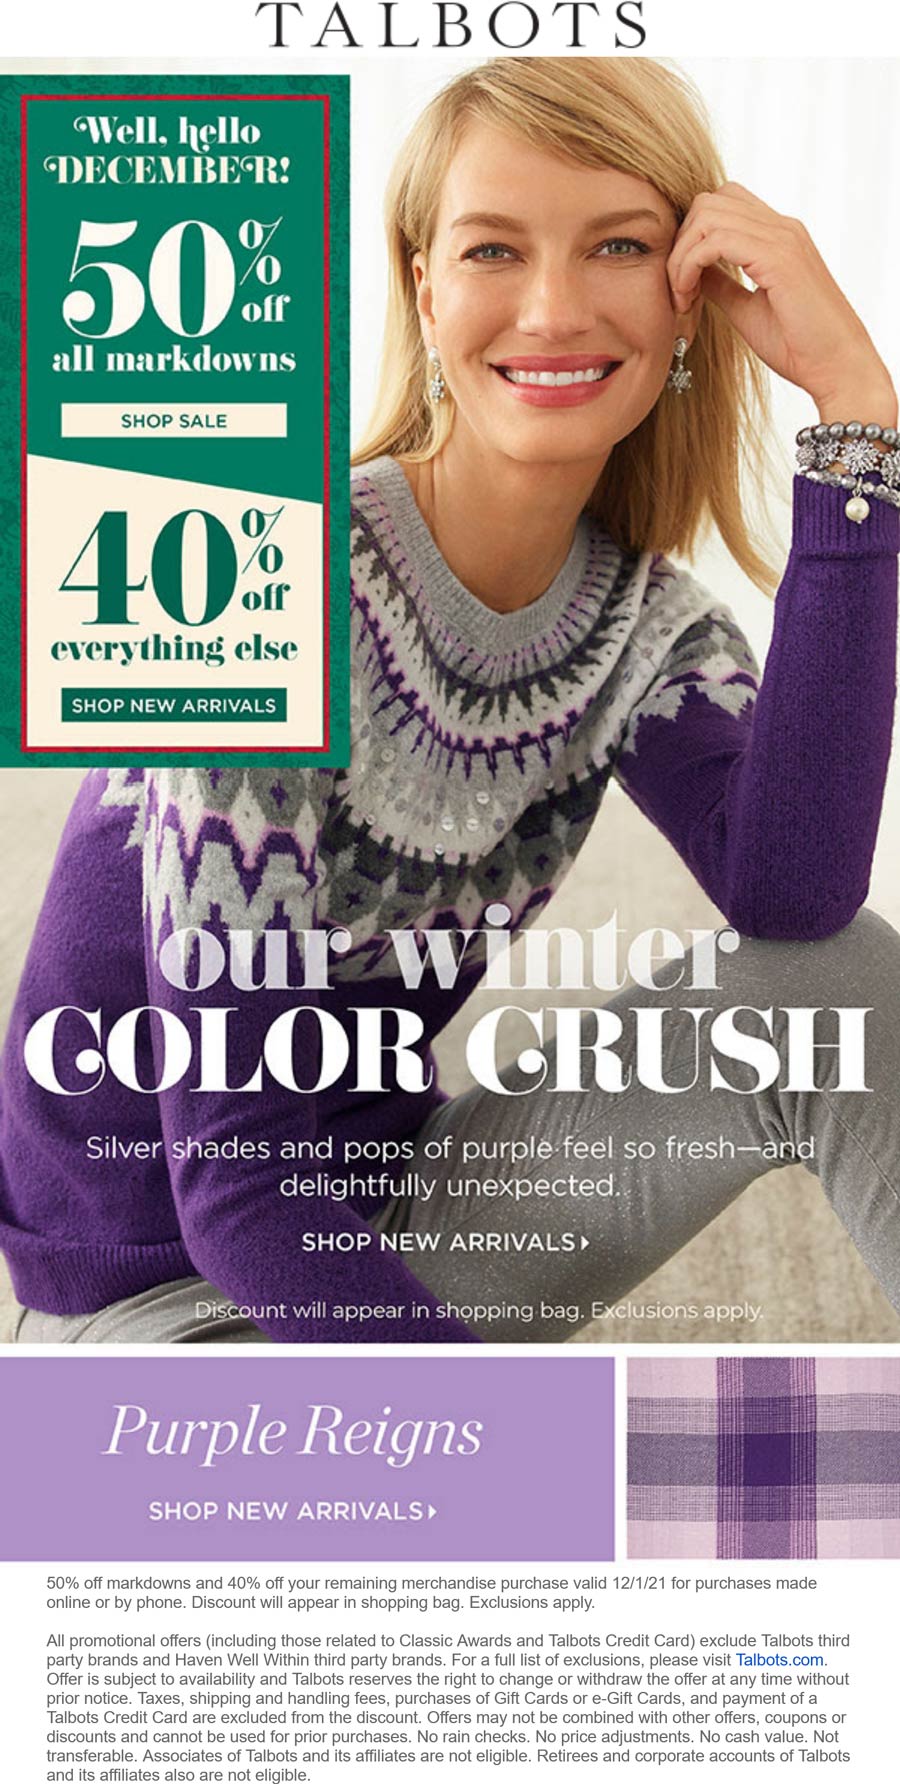 Talbots stores Coupon  50% off sale items & 40% everything else online today at Talbots #talbots 